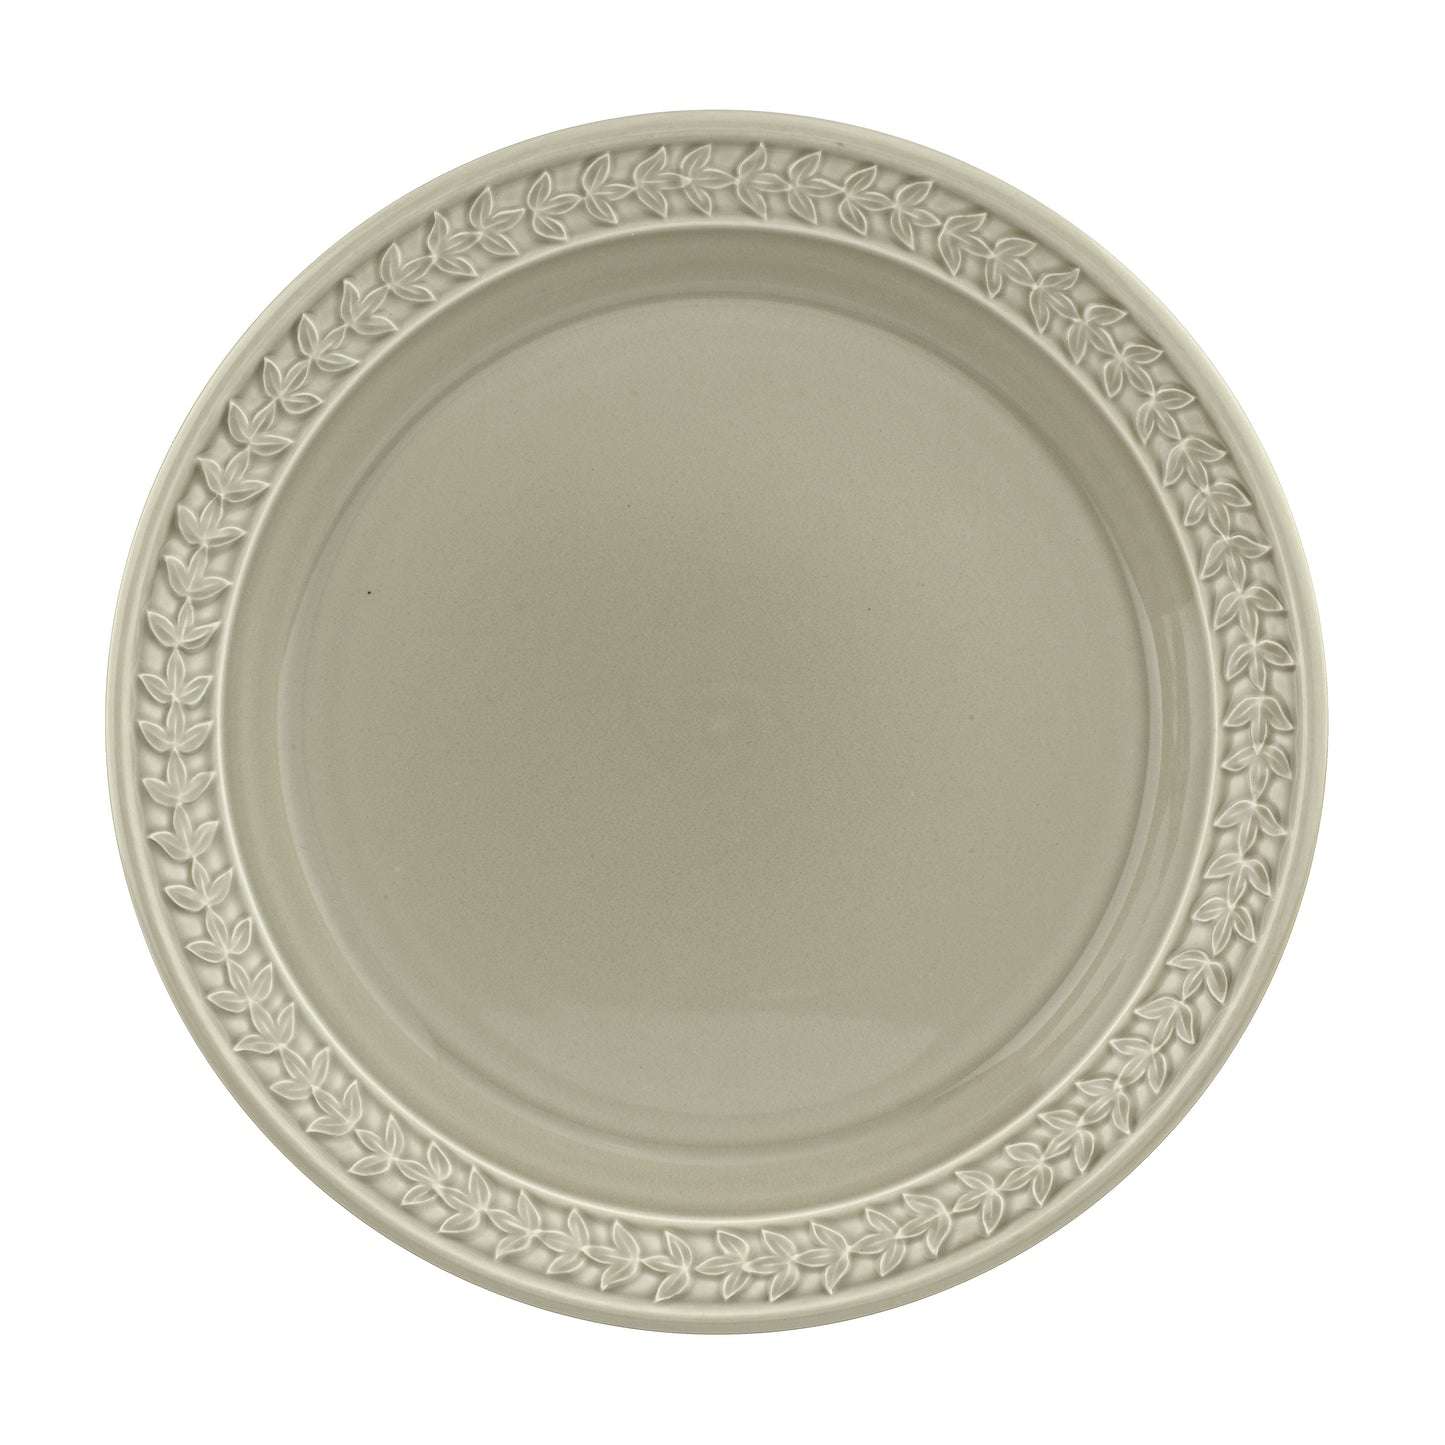 Side plate - Stone set of 2